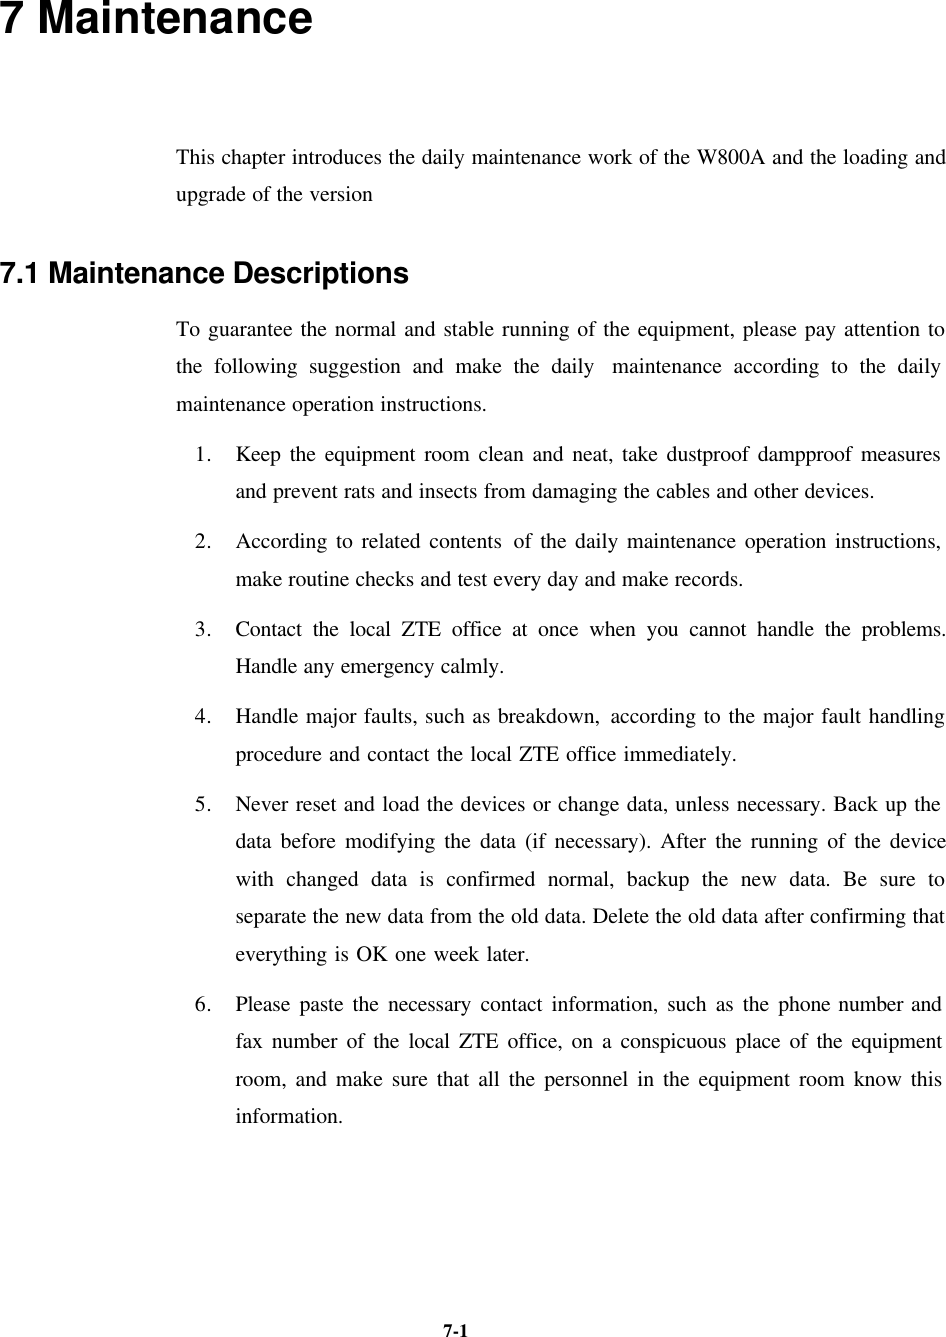   7-1 7 Maintenance This chapter introduces the daily maintenance work of the W800A and the loading and upgrade of the version 7.1 Maintenance Descriptions To guarantee the normal and stable running of the equipment, please pay attention to the following suggestion and make the daily  maintenance according to the daily maintenance operation instructions.   1. Keep the equipment room clean and neat, take dustproof dampproof measures and prevent rats and insects from damaging the cables and other devices.   2. According to related contents of the daily maintenance operation instructions, make routine checks and test every day and make records.   3. Contact the local ZTE office at once when you cannot handle the problems. Handle any emergency calmly. 4. Handle major faults, such as breakdown, according to the major fault handling procedure and contact the local ZTE office immediately.   5. Never reset and load the devices or change data, unless necessary. Back up the data before modifying the data (if necessary). After the running of the device with changed data is confirmed normal, backup the new data. Be sure to separate the new data from the old data. Delete the old data after confirming that everything is OK one week later.   6. Please paste the necessary contact information, such as the phone number and fax number of the local ZTE office, on a conspicuous place of the equipment room, and make sure that all the personnel in the equipment room know this information.     